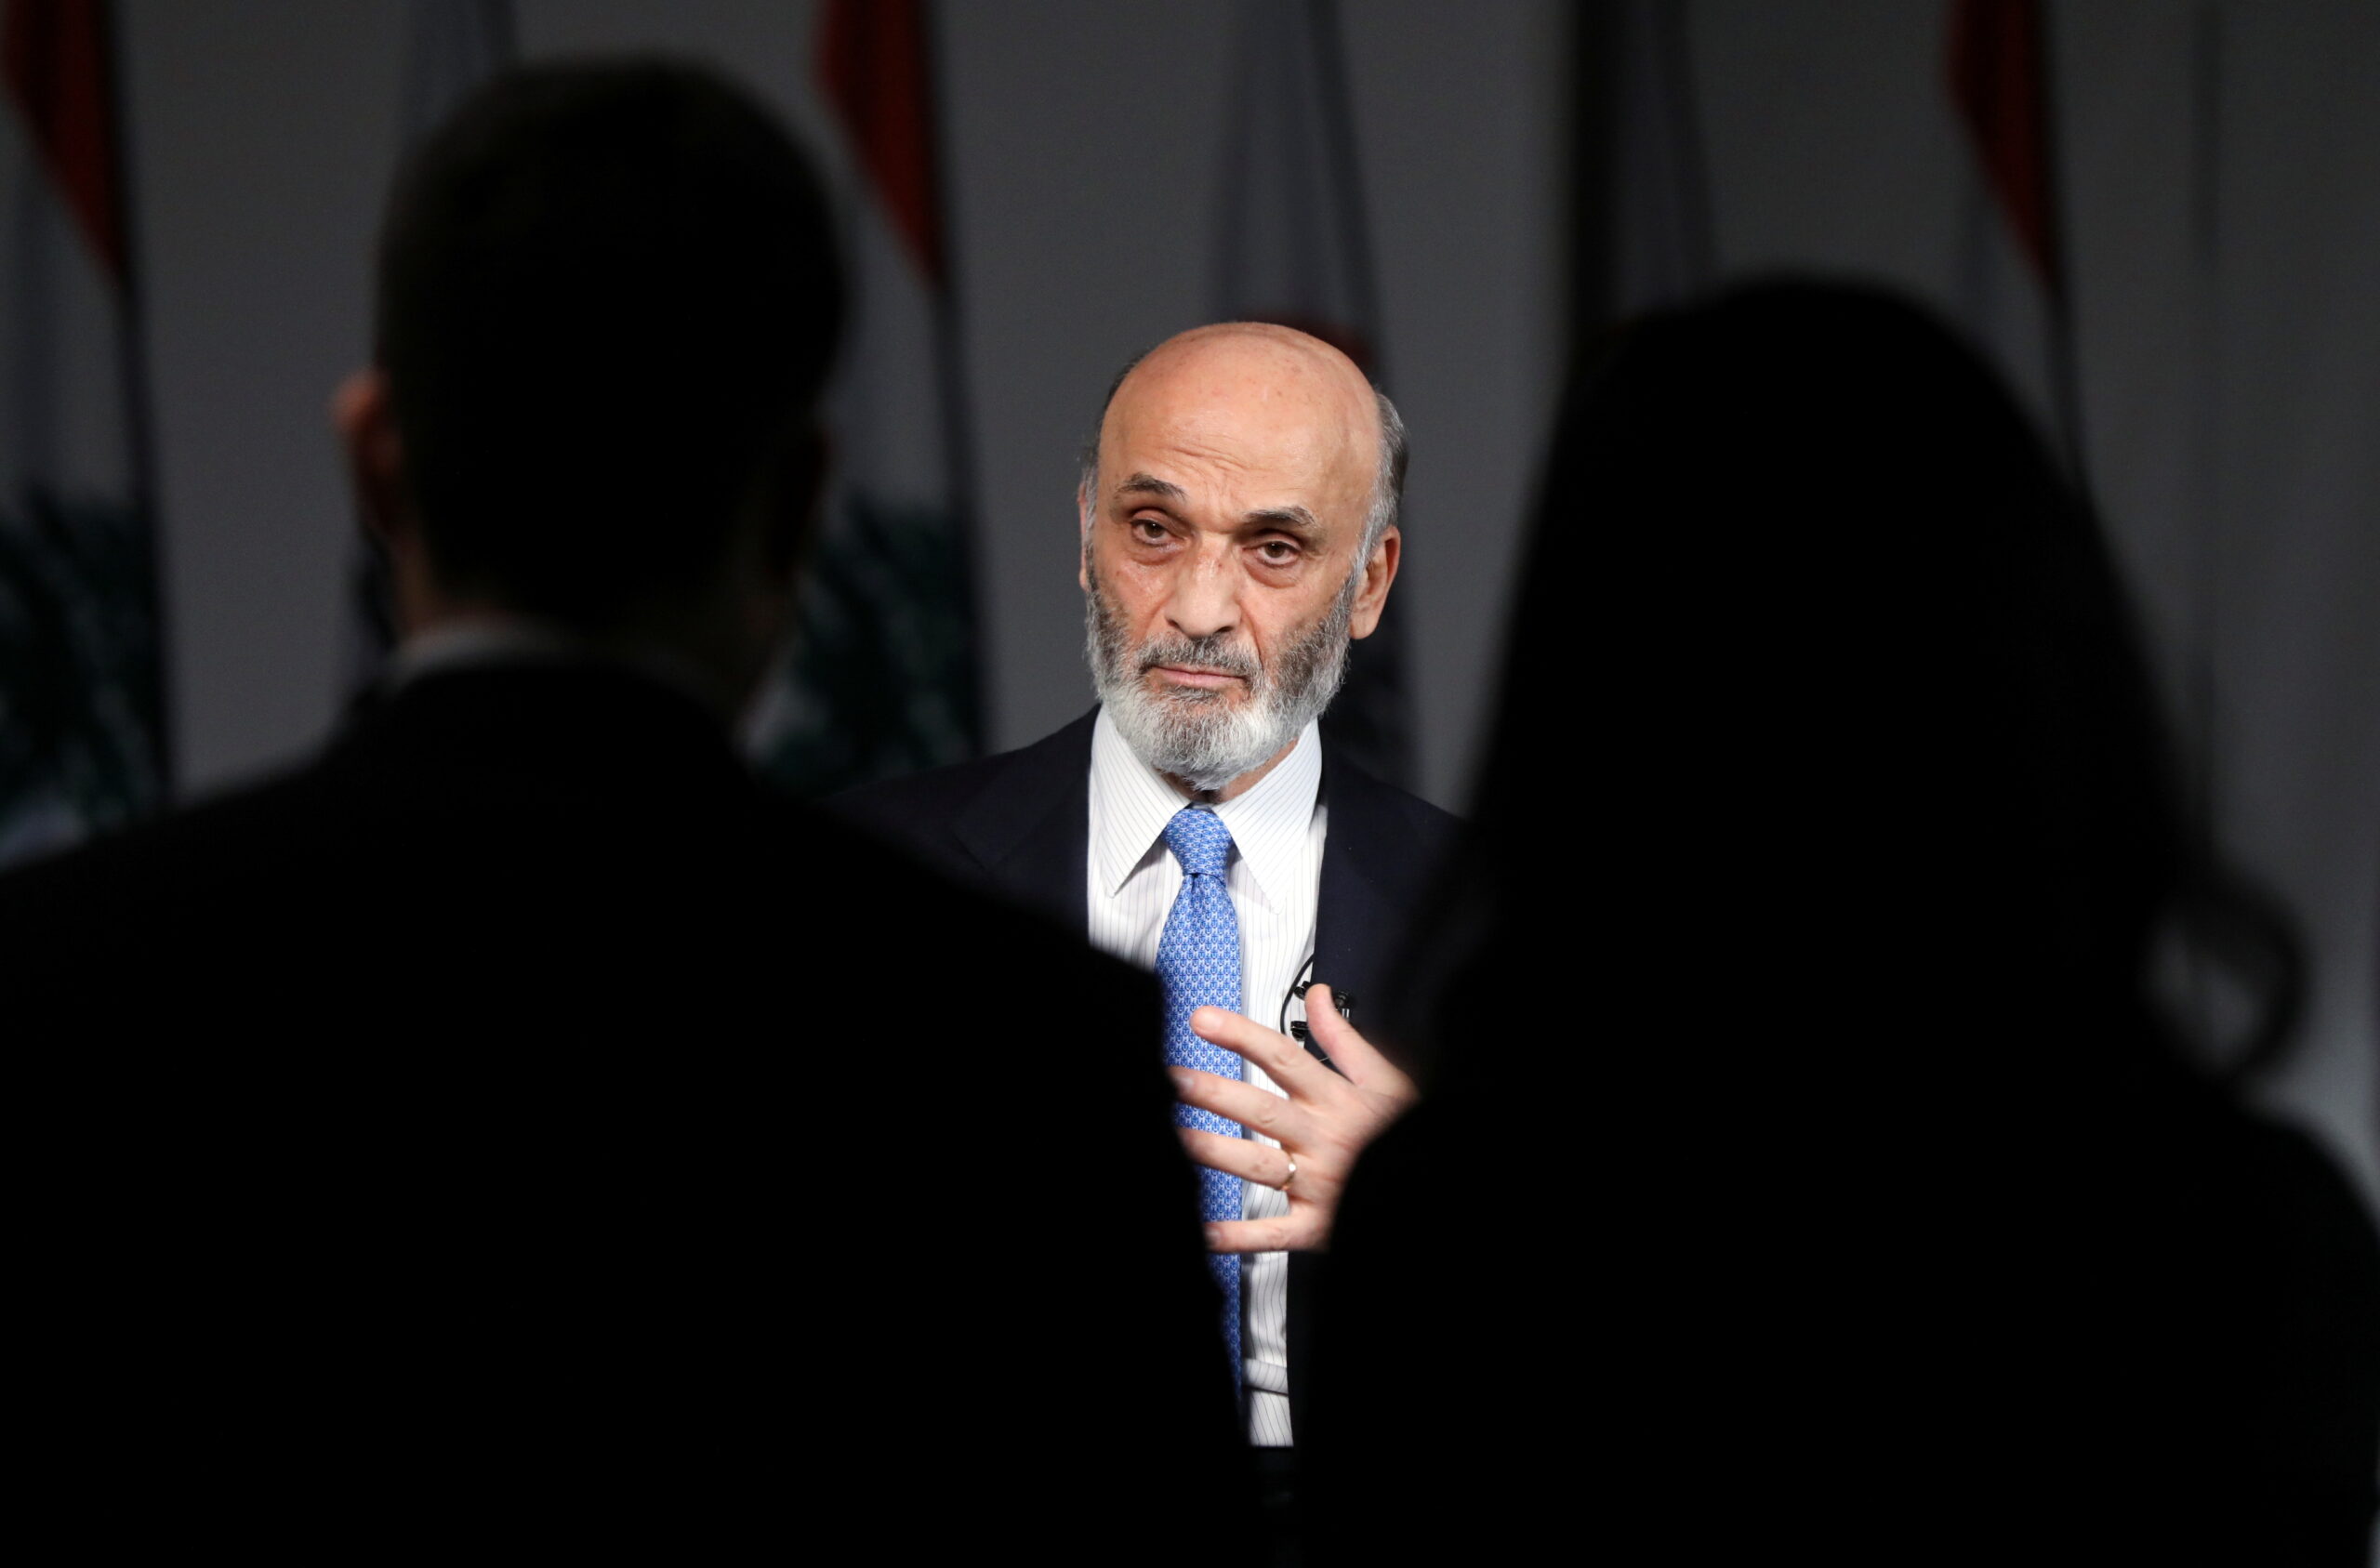 Samir Geagea, the leader of Lebanon’s Christian Lebanese Forces party, speaks during an interview with Reuters at his residence in Maarab